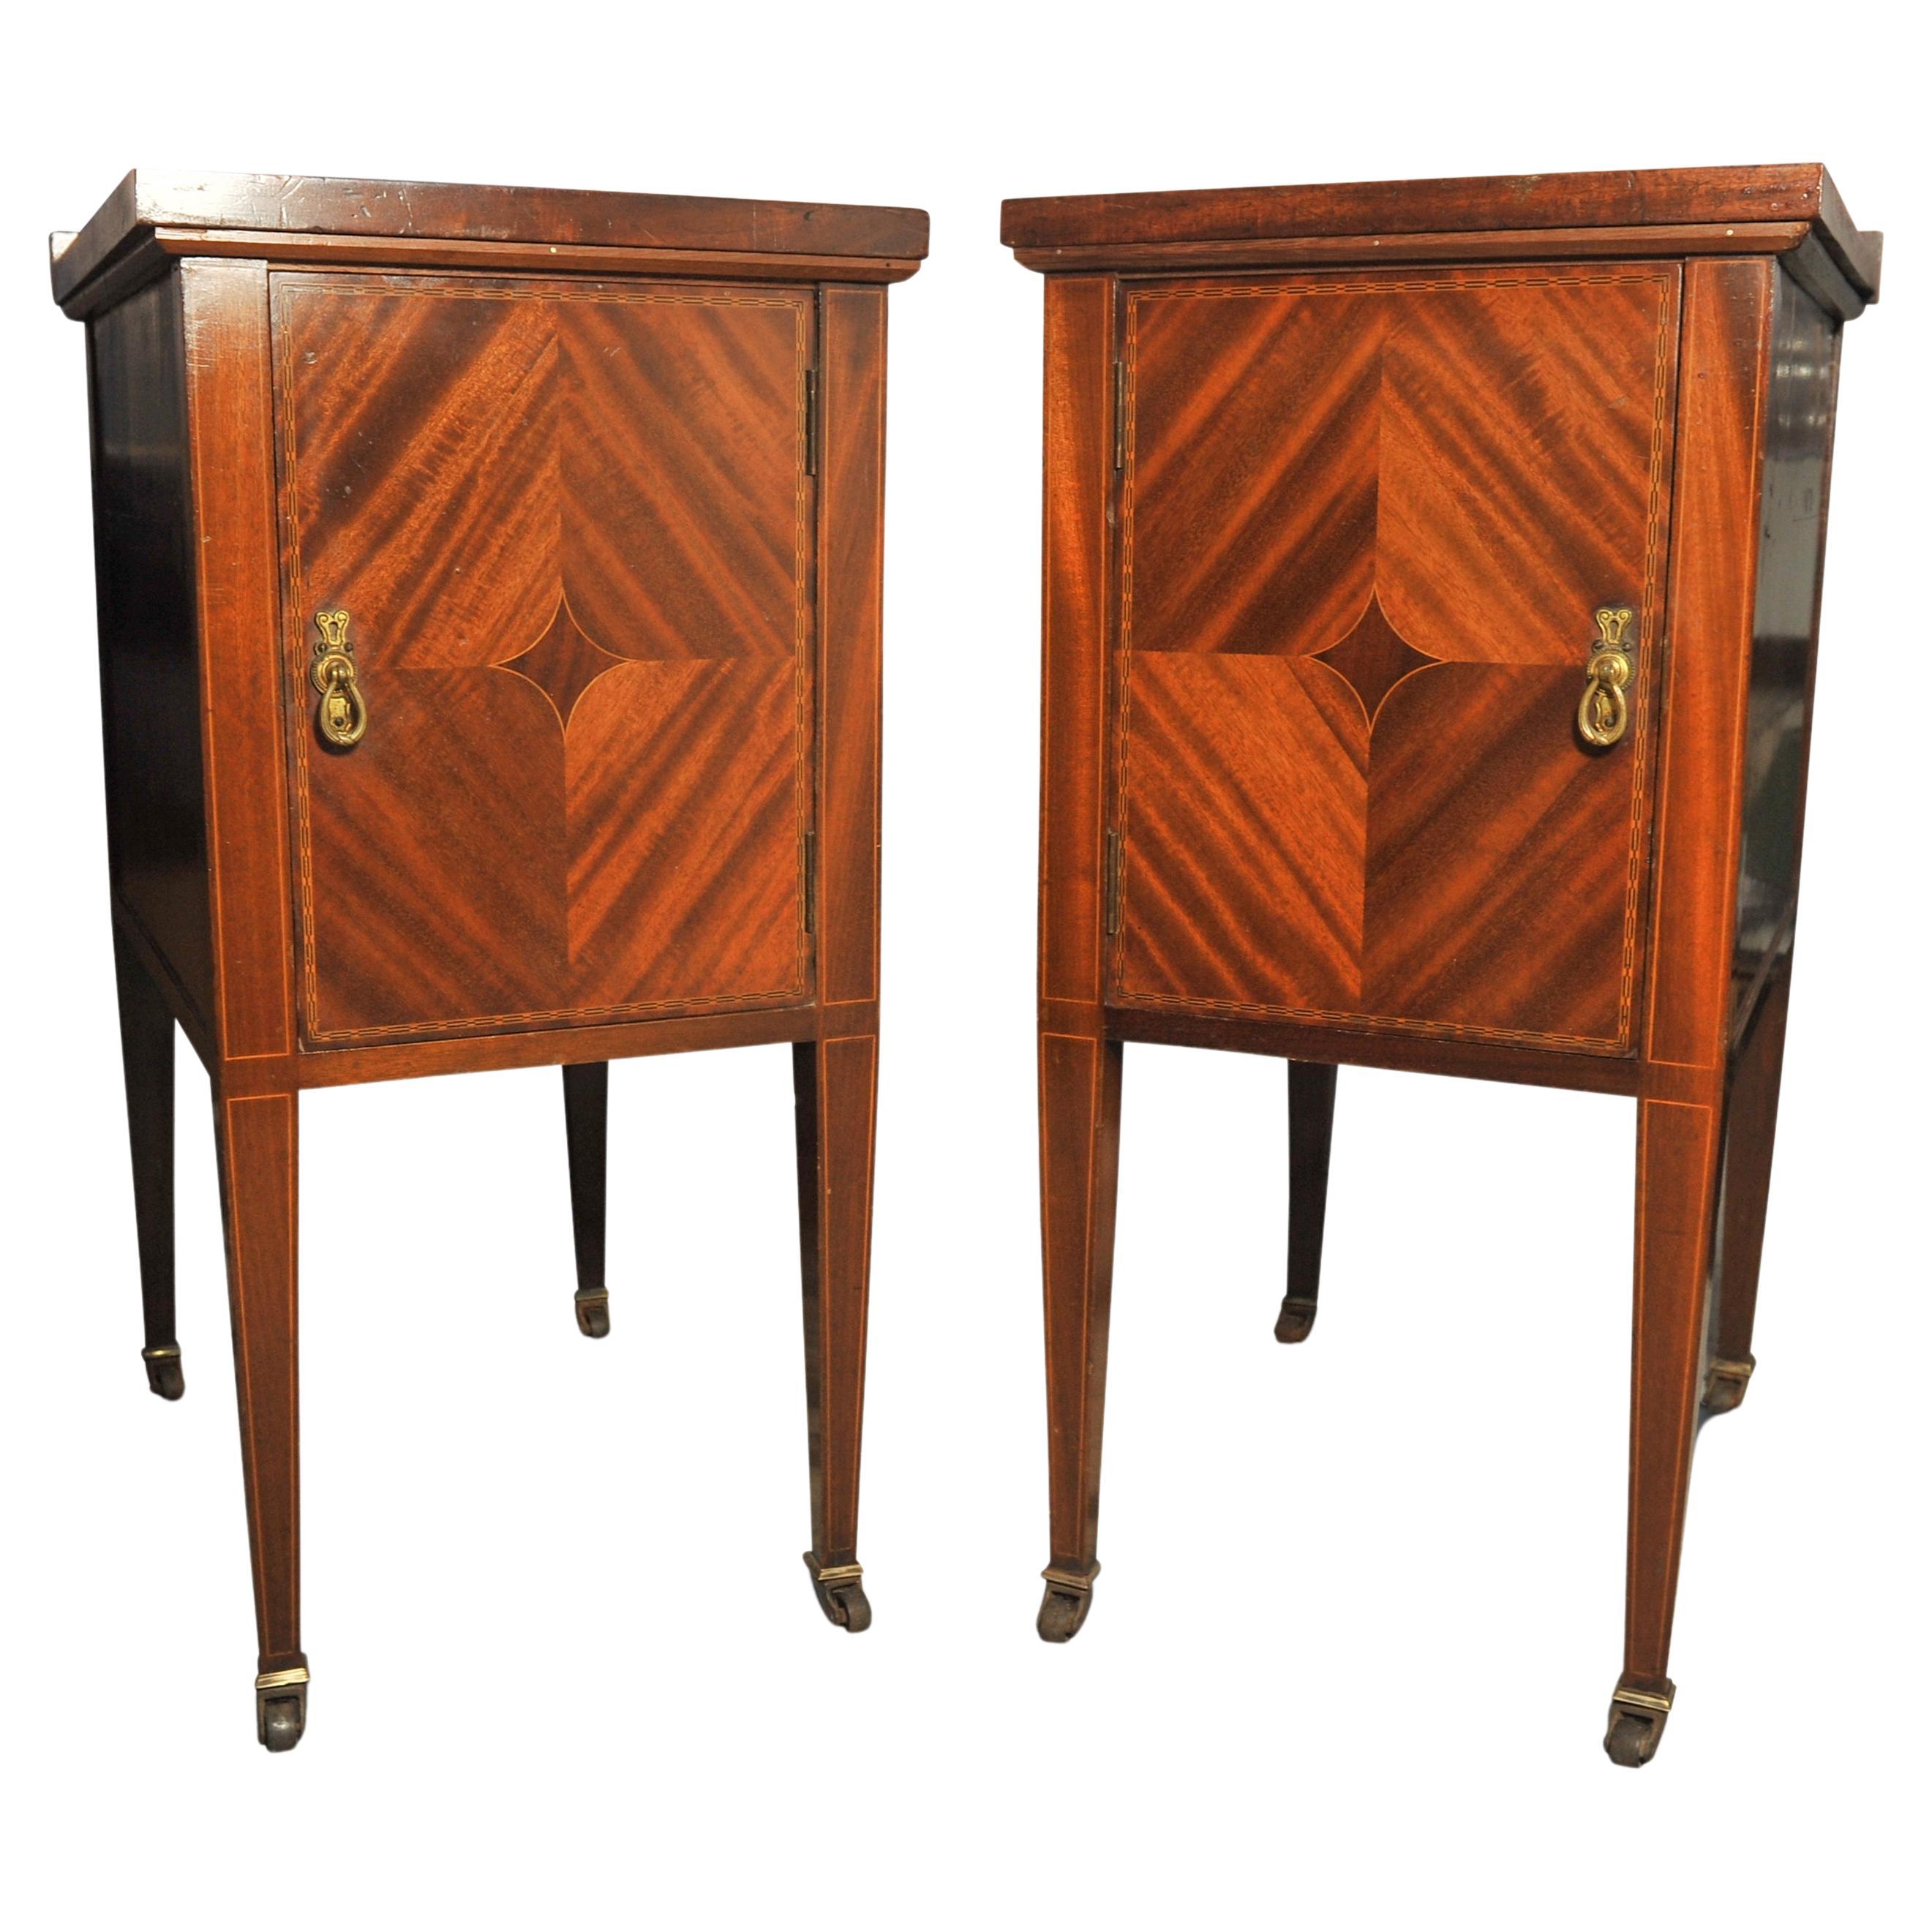 English Pair of Edwardian Handcrafted Flame Mahogany Veneer Nightstands / Pot Cupboards For Sale